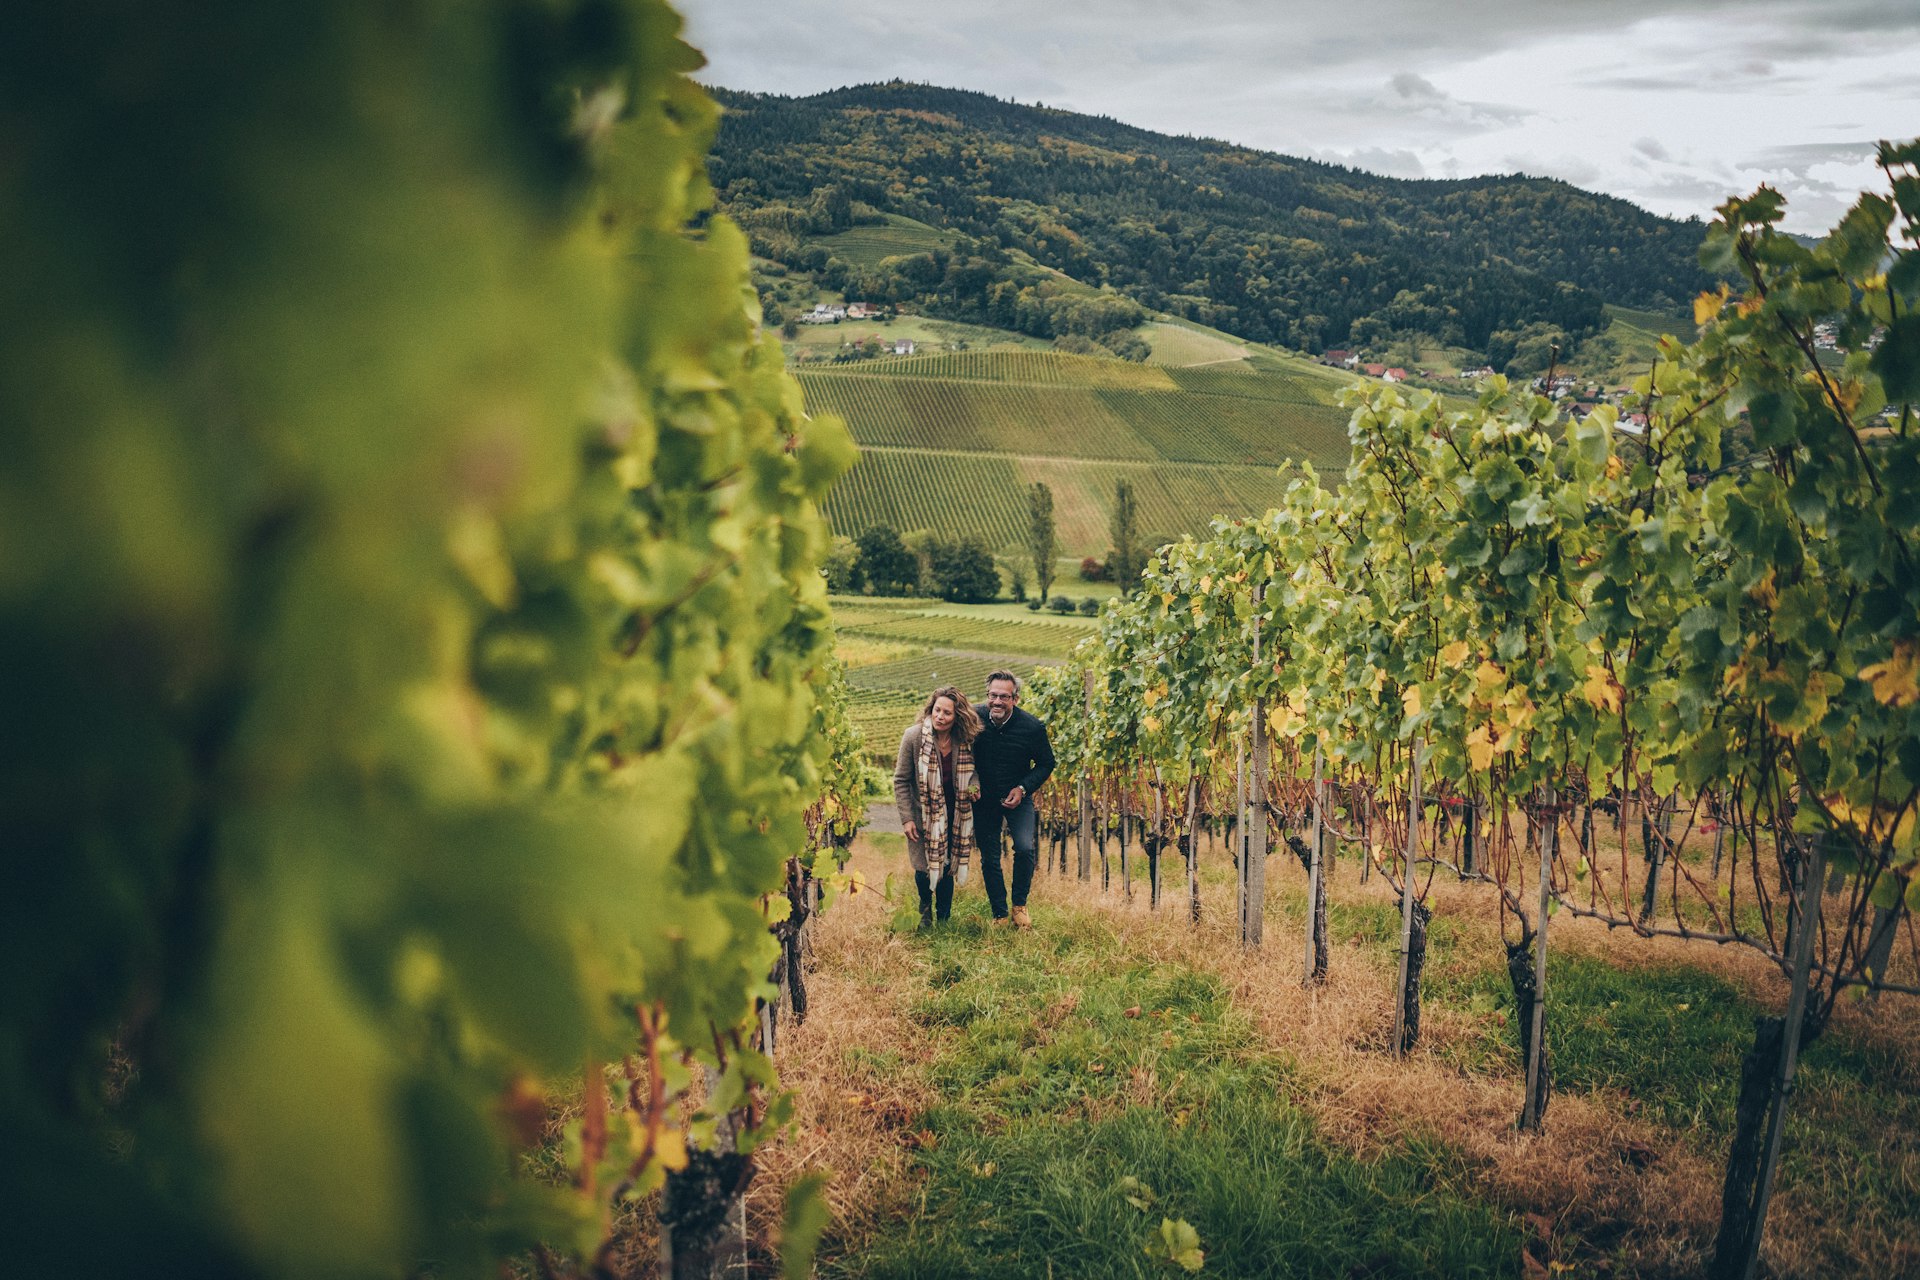 A couple is walking through a vineyard together as part of their hike in Frieburg